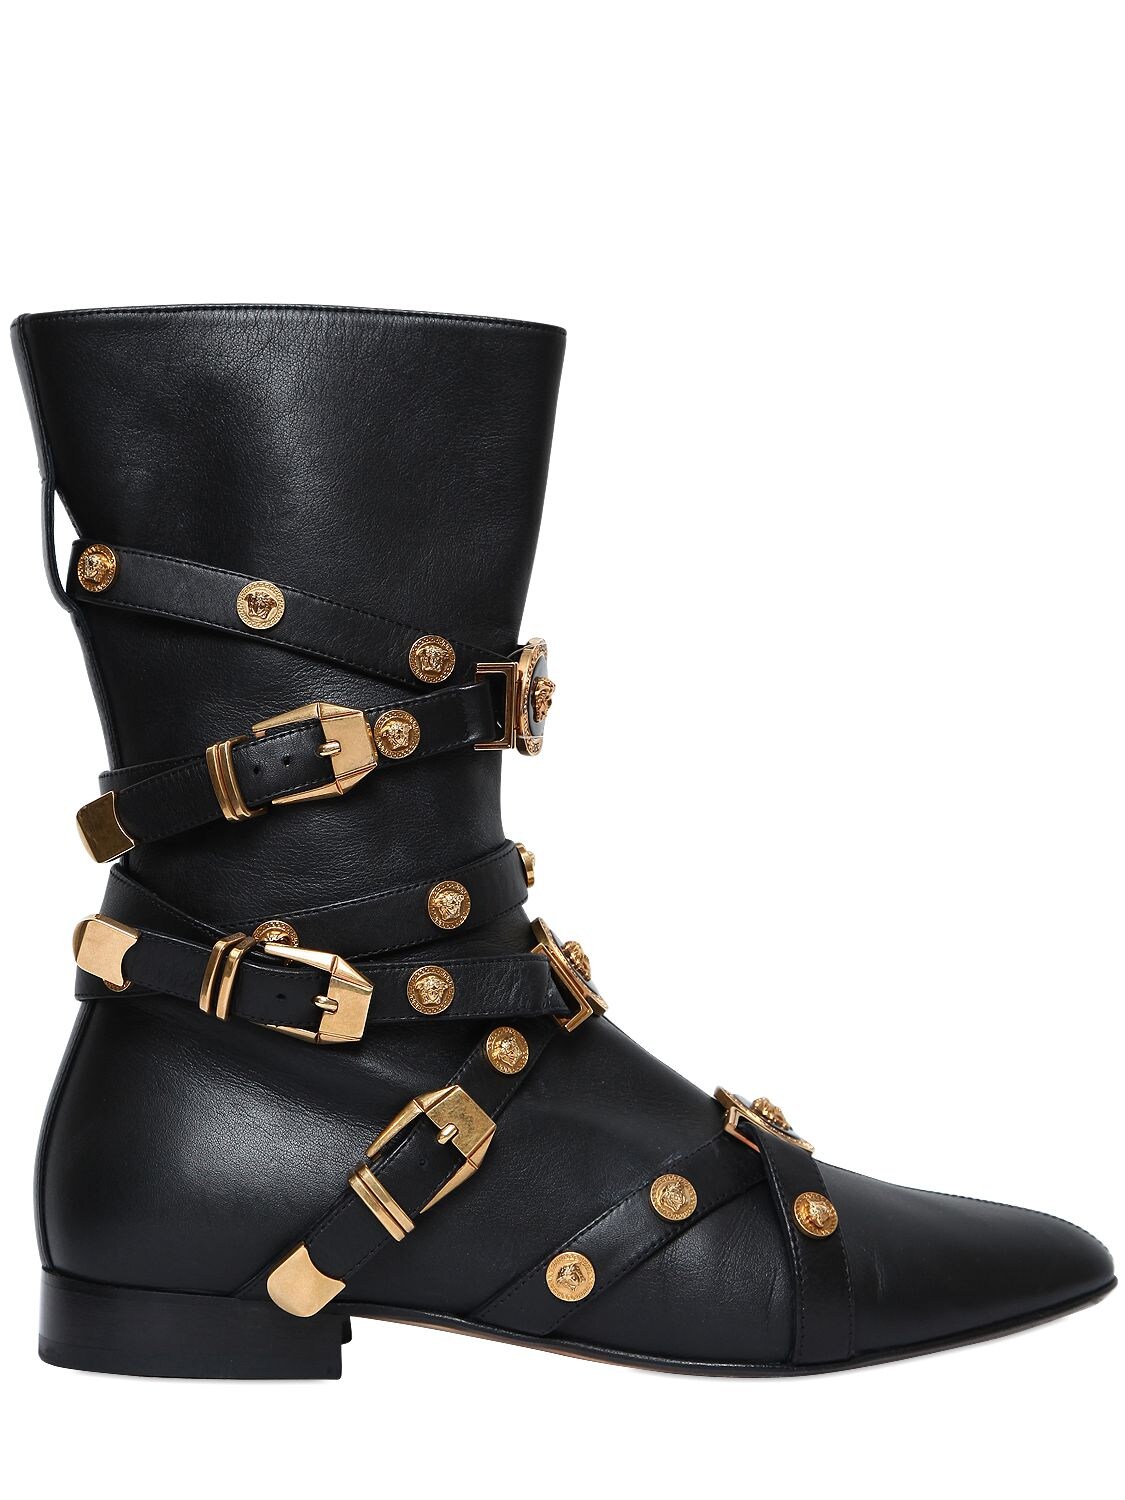 VERSACE 10MM STUDDED LEATHER ANKLE BOOTS,67IM7E001-SzQxVA2